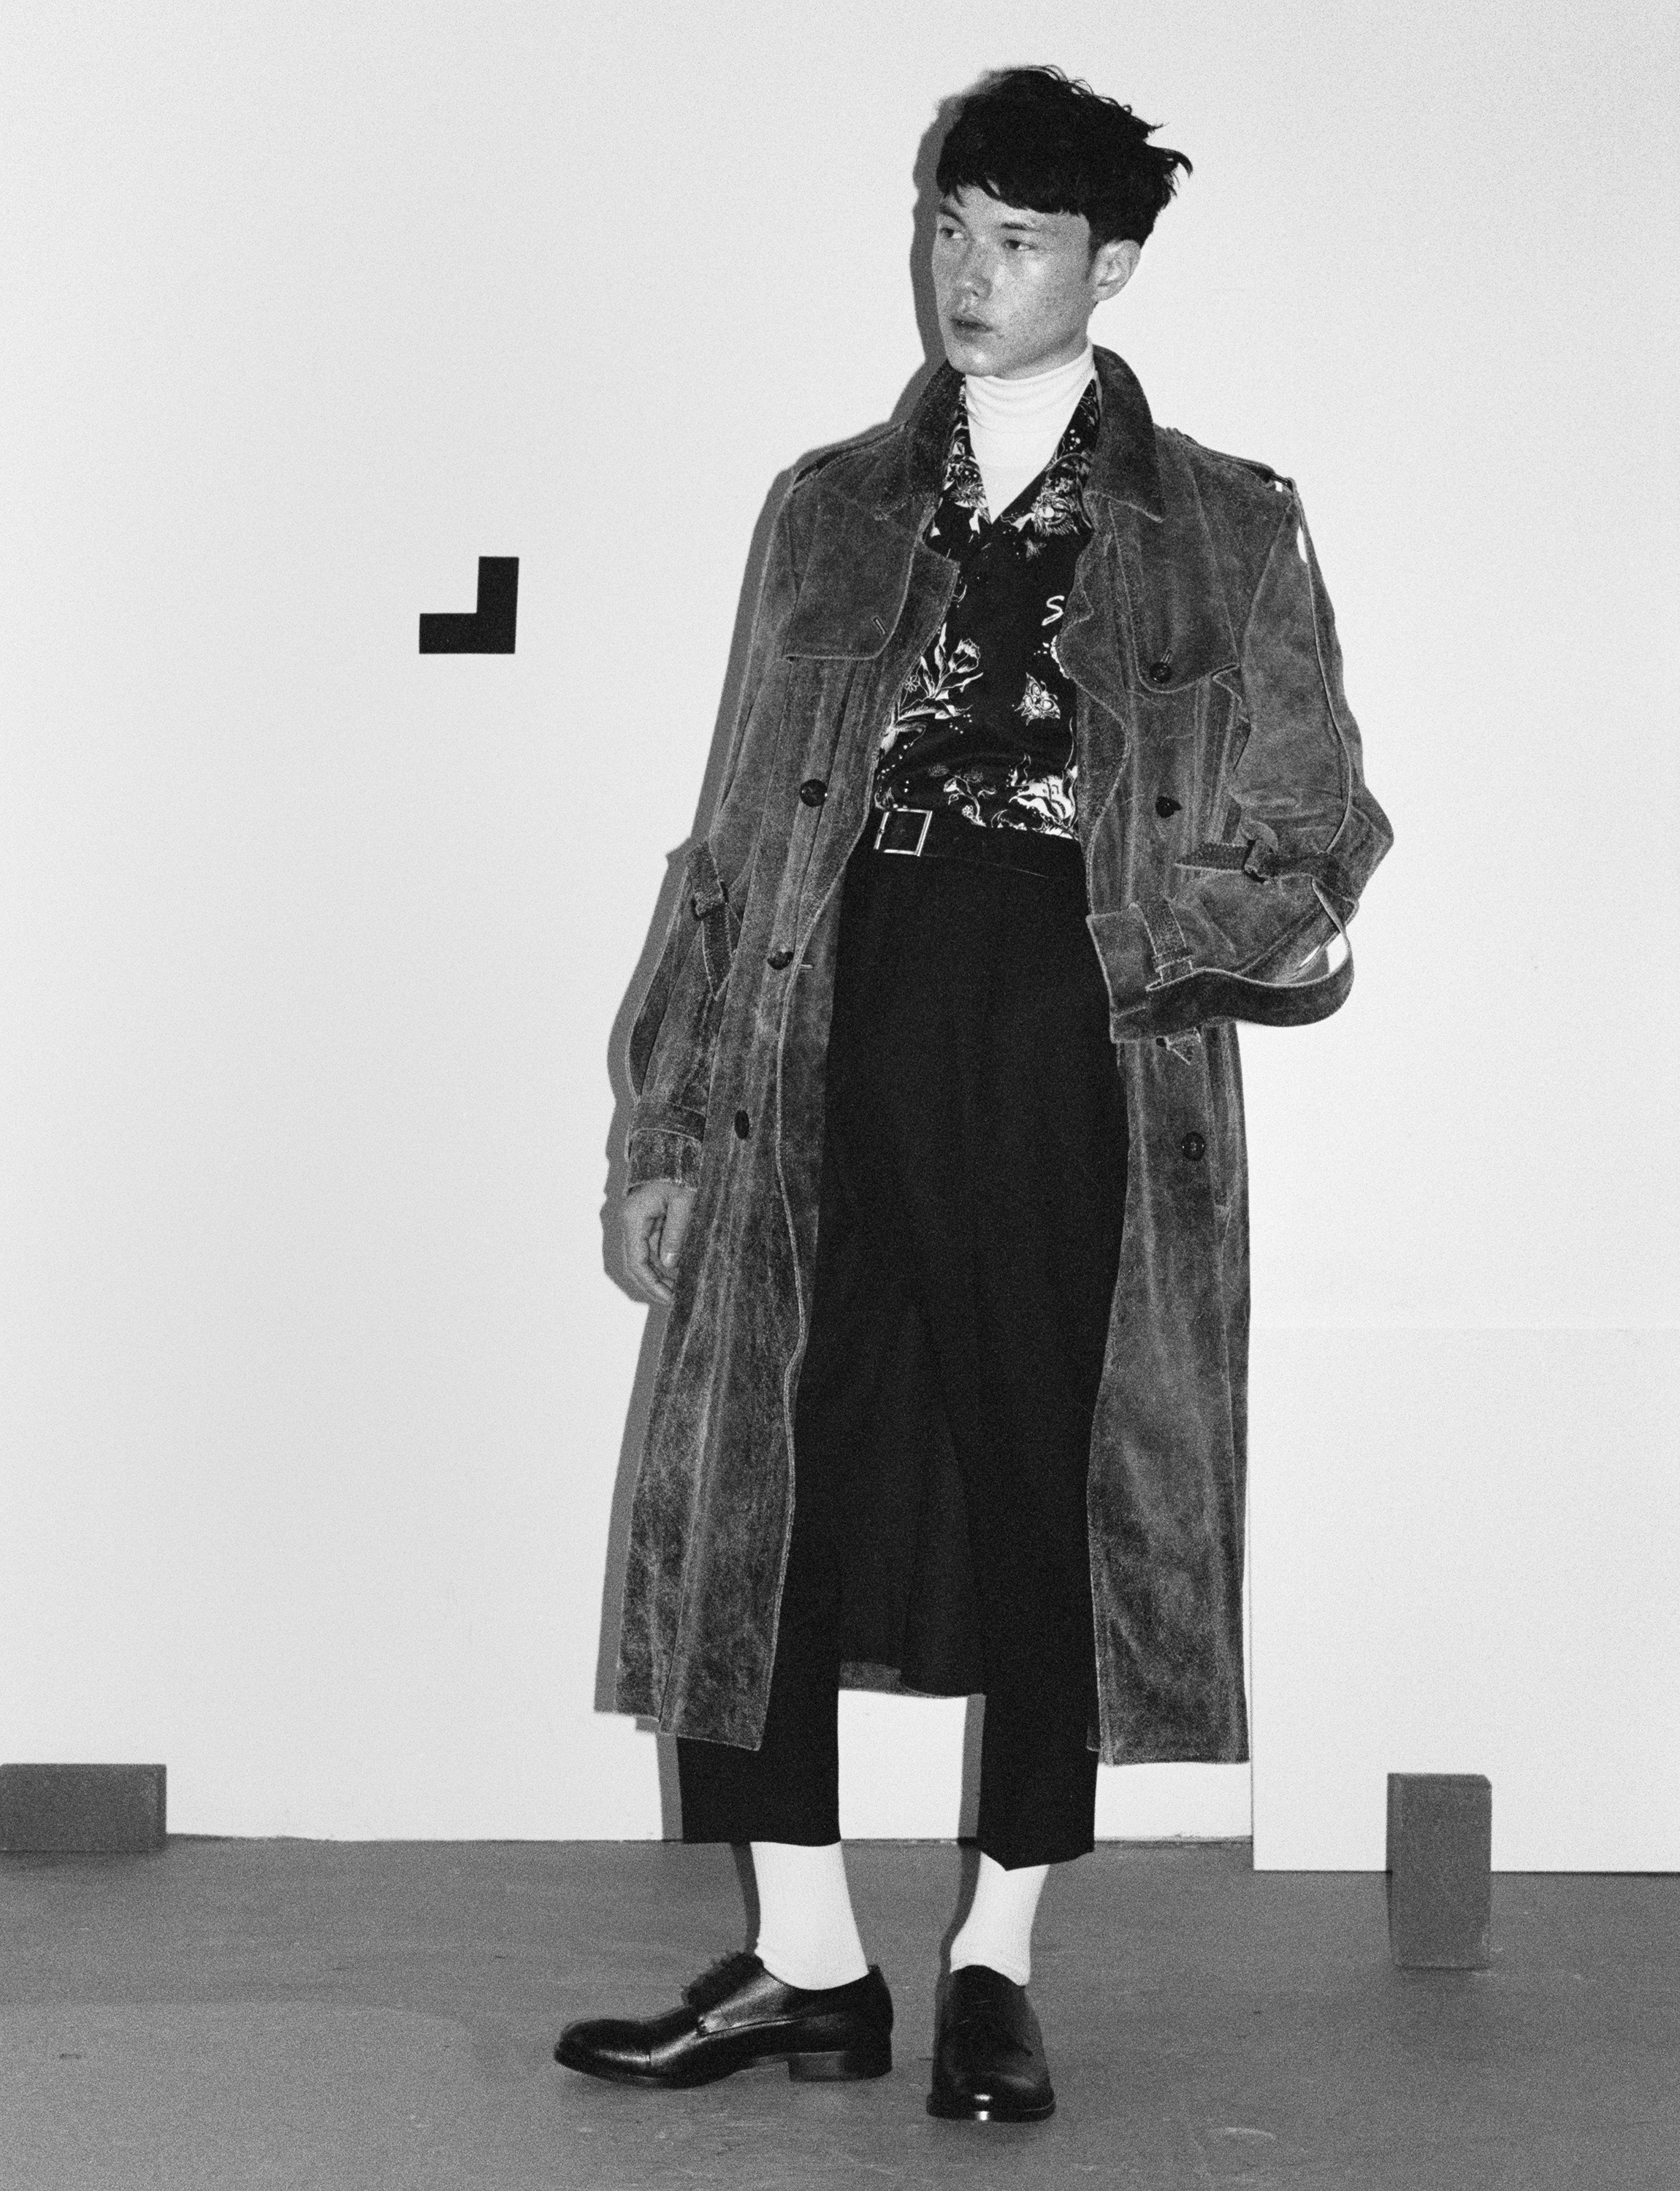  Raf Simons from David Casavant Archive Leather trench, Stylist’s Own Turtleneck, Givenchy at mrporter.com Camp-Collar Printed Shirt, Mr P. at mrporter.com Tapered Pleated Worsted-Wool Trousers Vintage belt, Stylist’s Own Socks Giorgio Armani Shoes